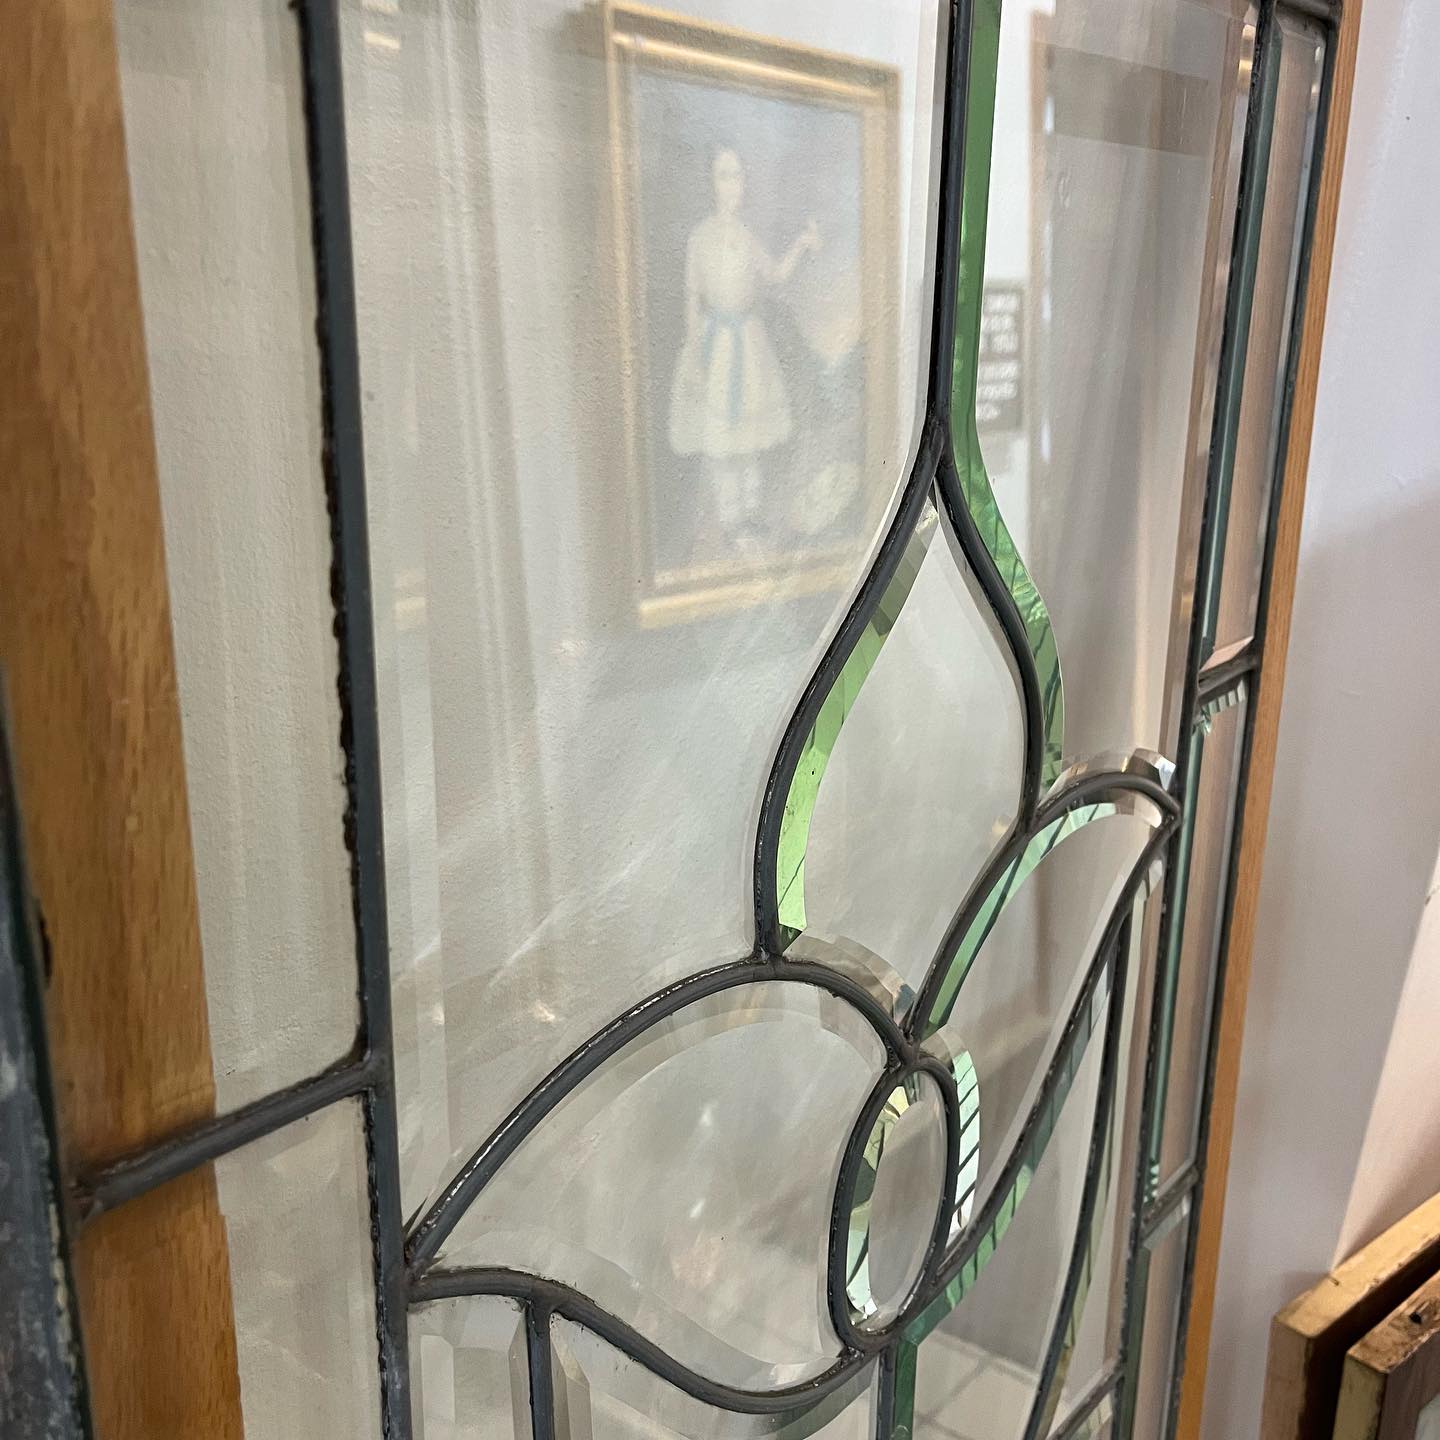 Antique Beveled/Leaded Glass